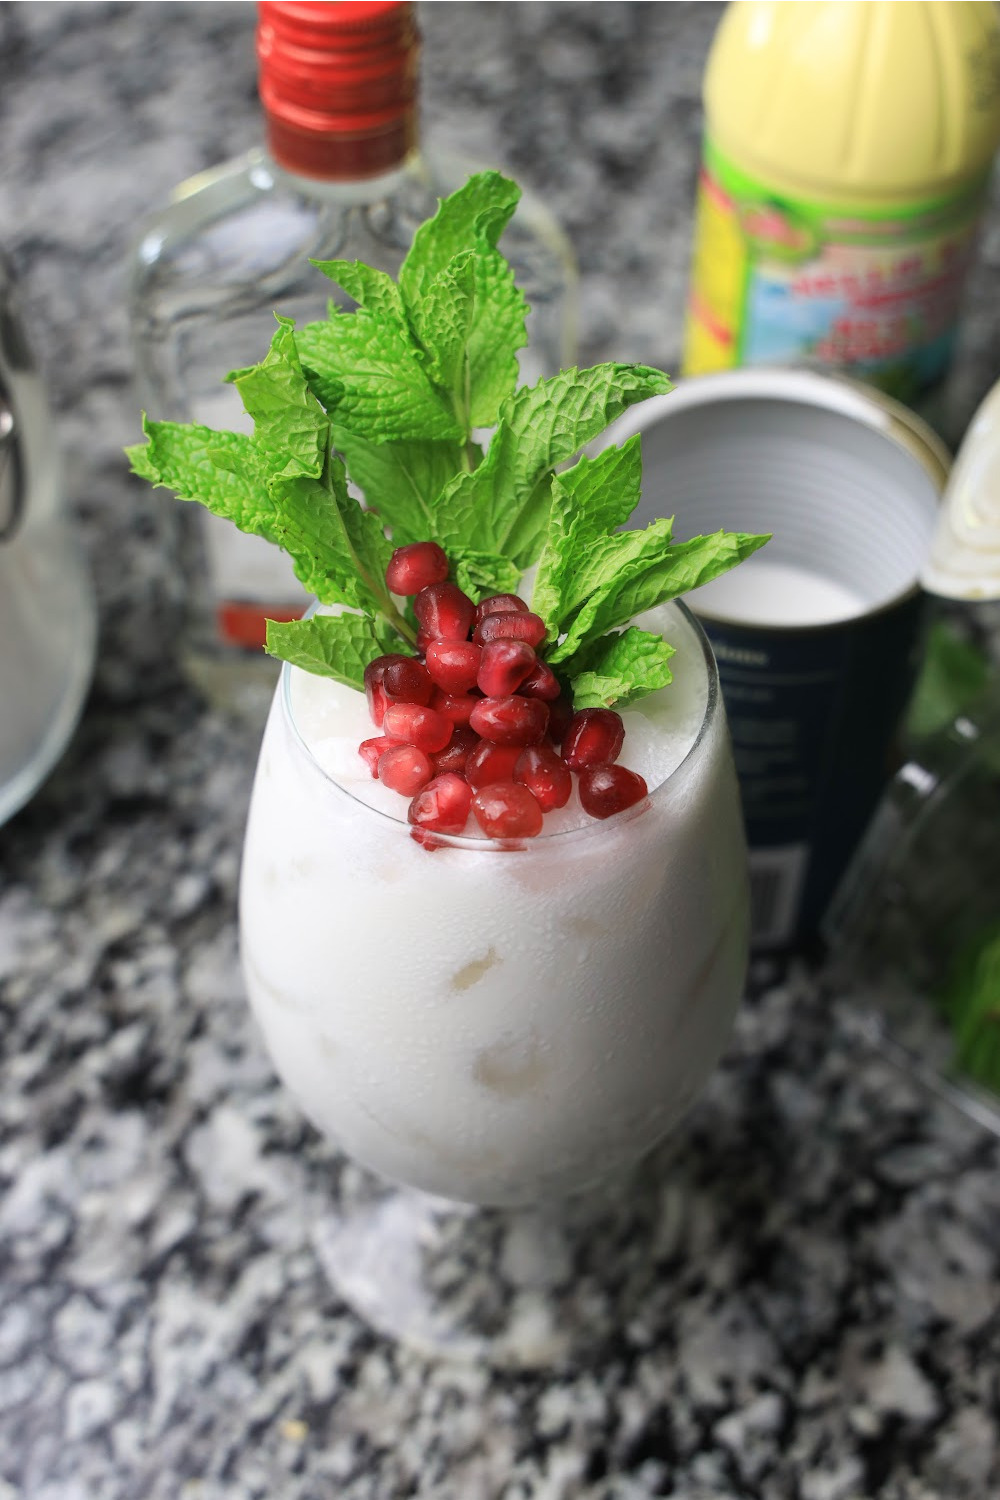 This pretty white Christmas mojito is topped with pomegranate arils and fresh mint. It sits on a black and white granite countertop with some of the mojito ingredients around it.